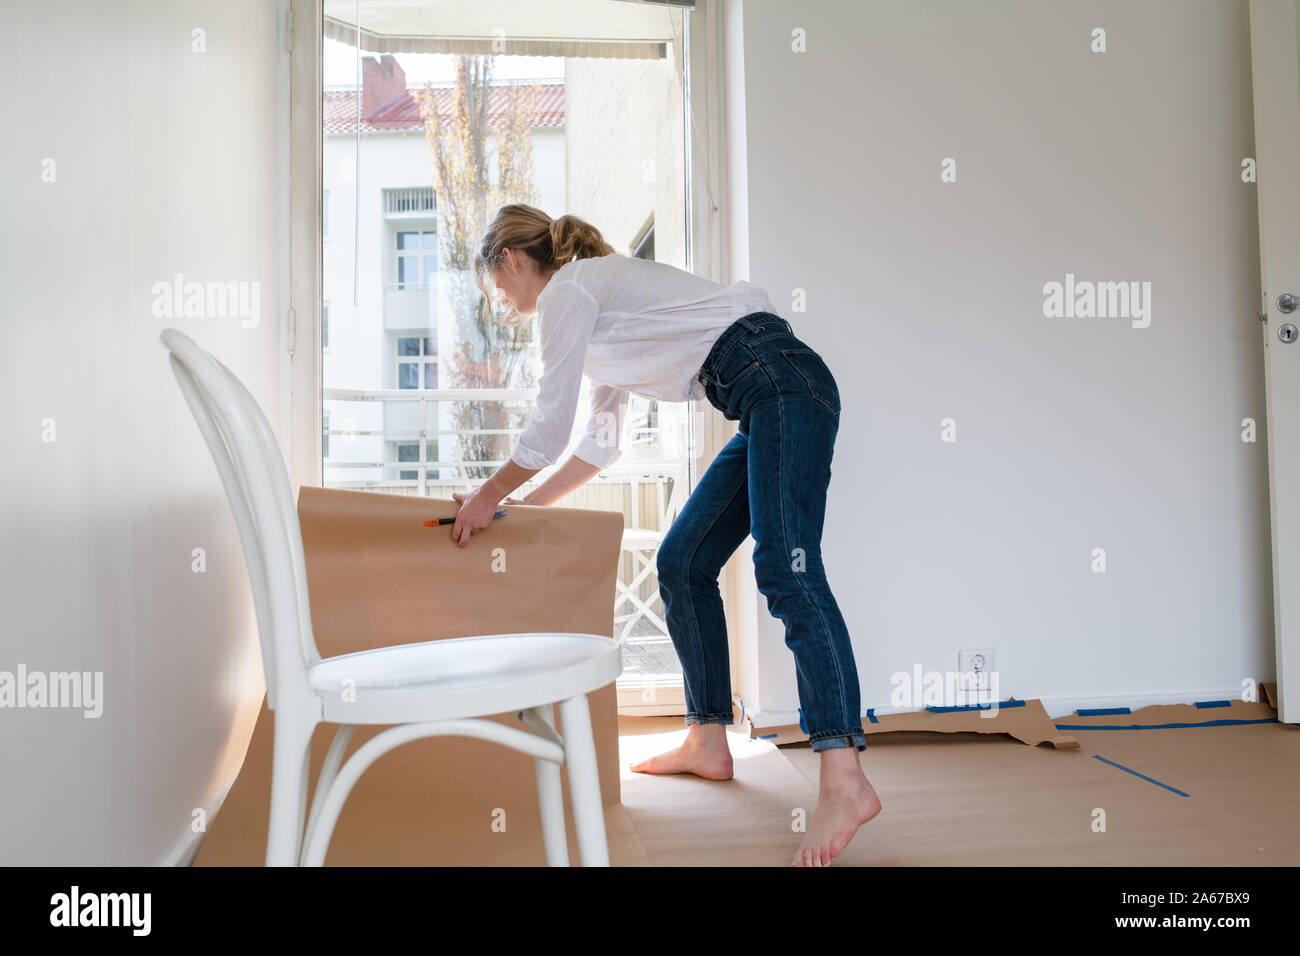 Woman working on home renovation project Stock Photo